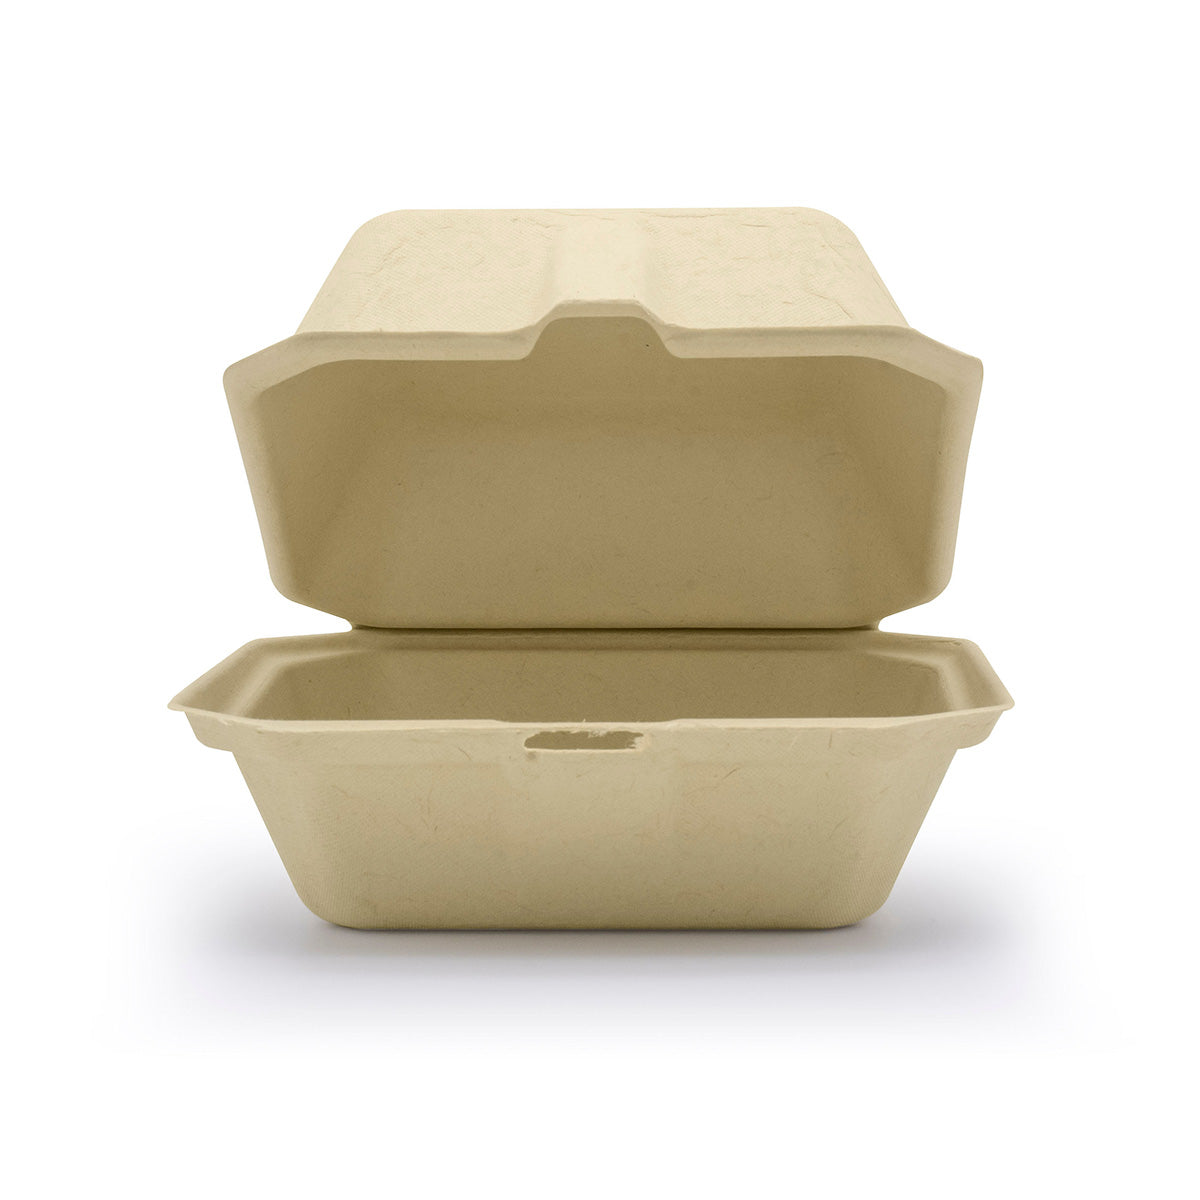 6" x 6" Compostable Clamshell | 1 Compartment | No PFAS Added (Case of 400)